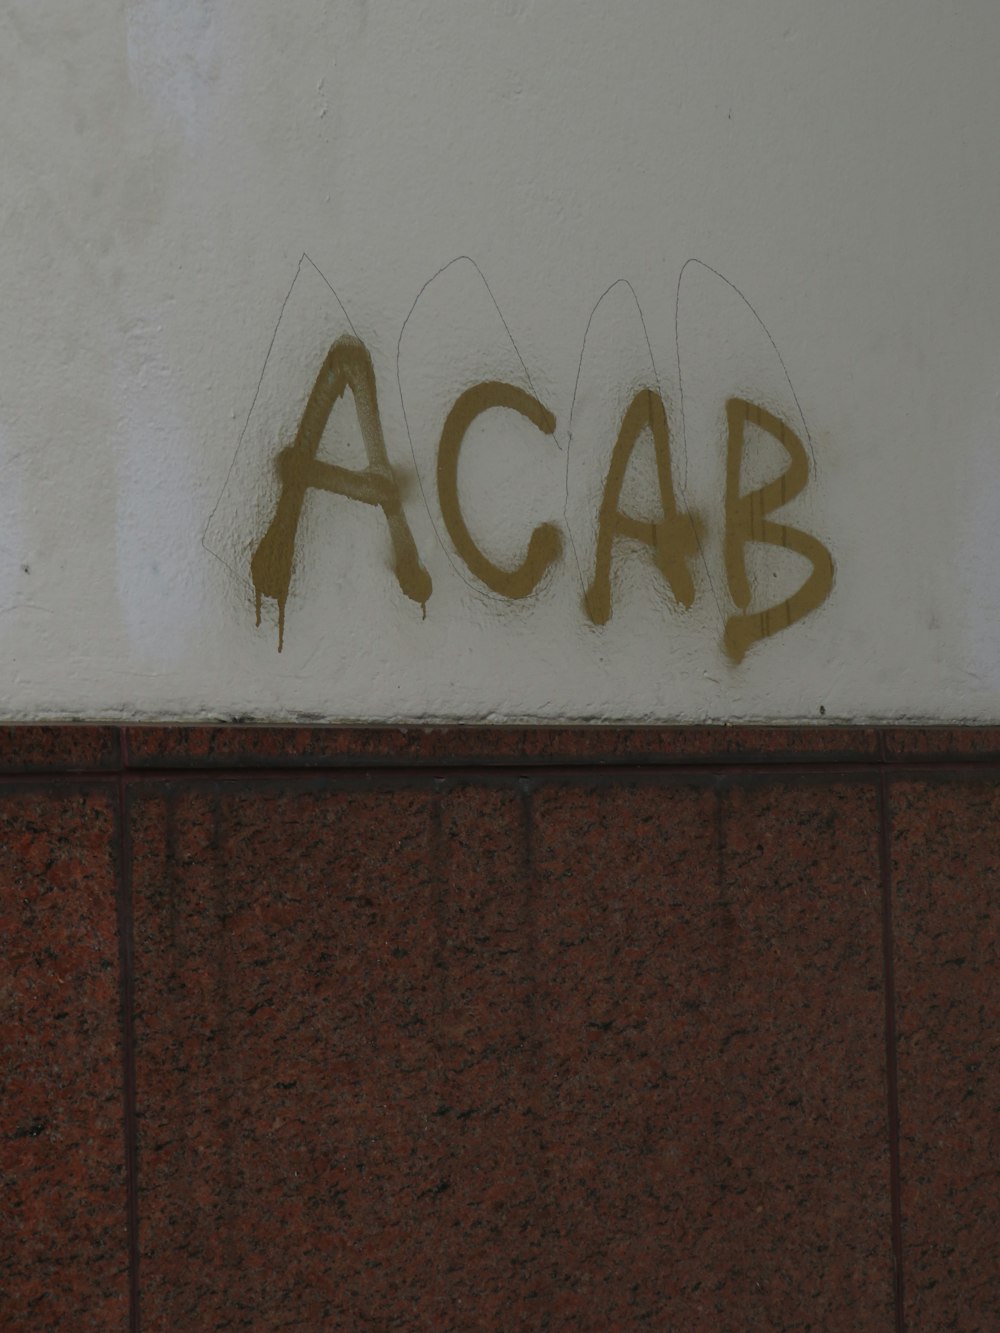 graffiti on the side of a building reads acab